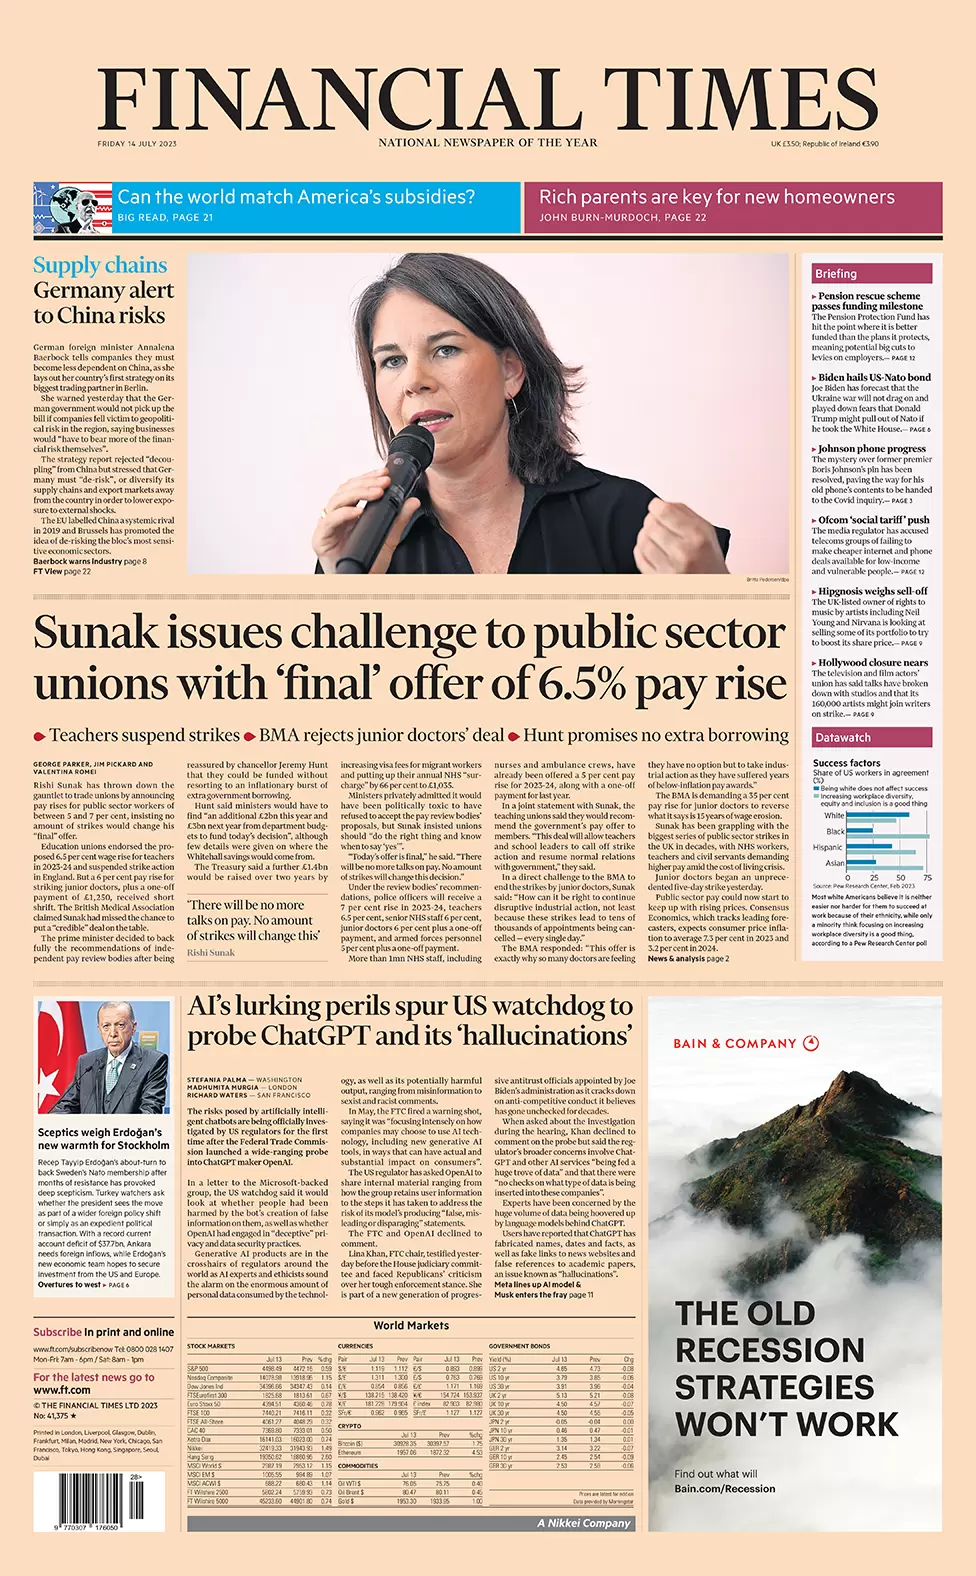 Financial Times - Sunak issues challenges to public sector unions with final offer of 6.5% pay rise 